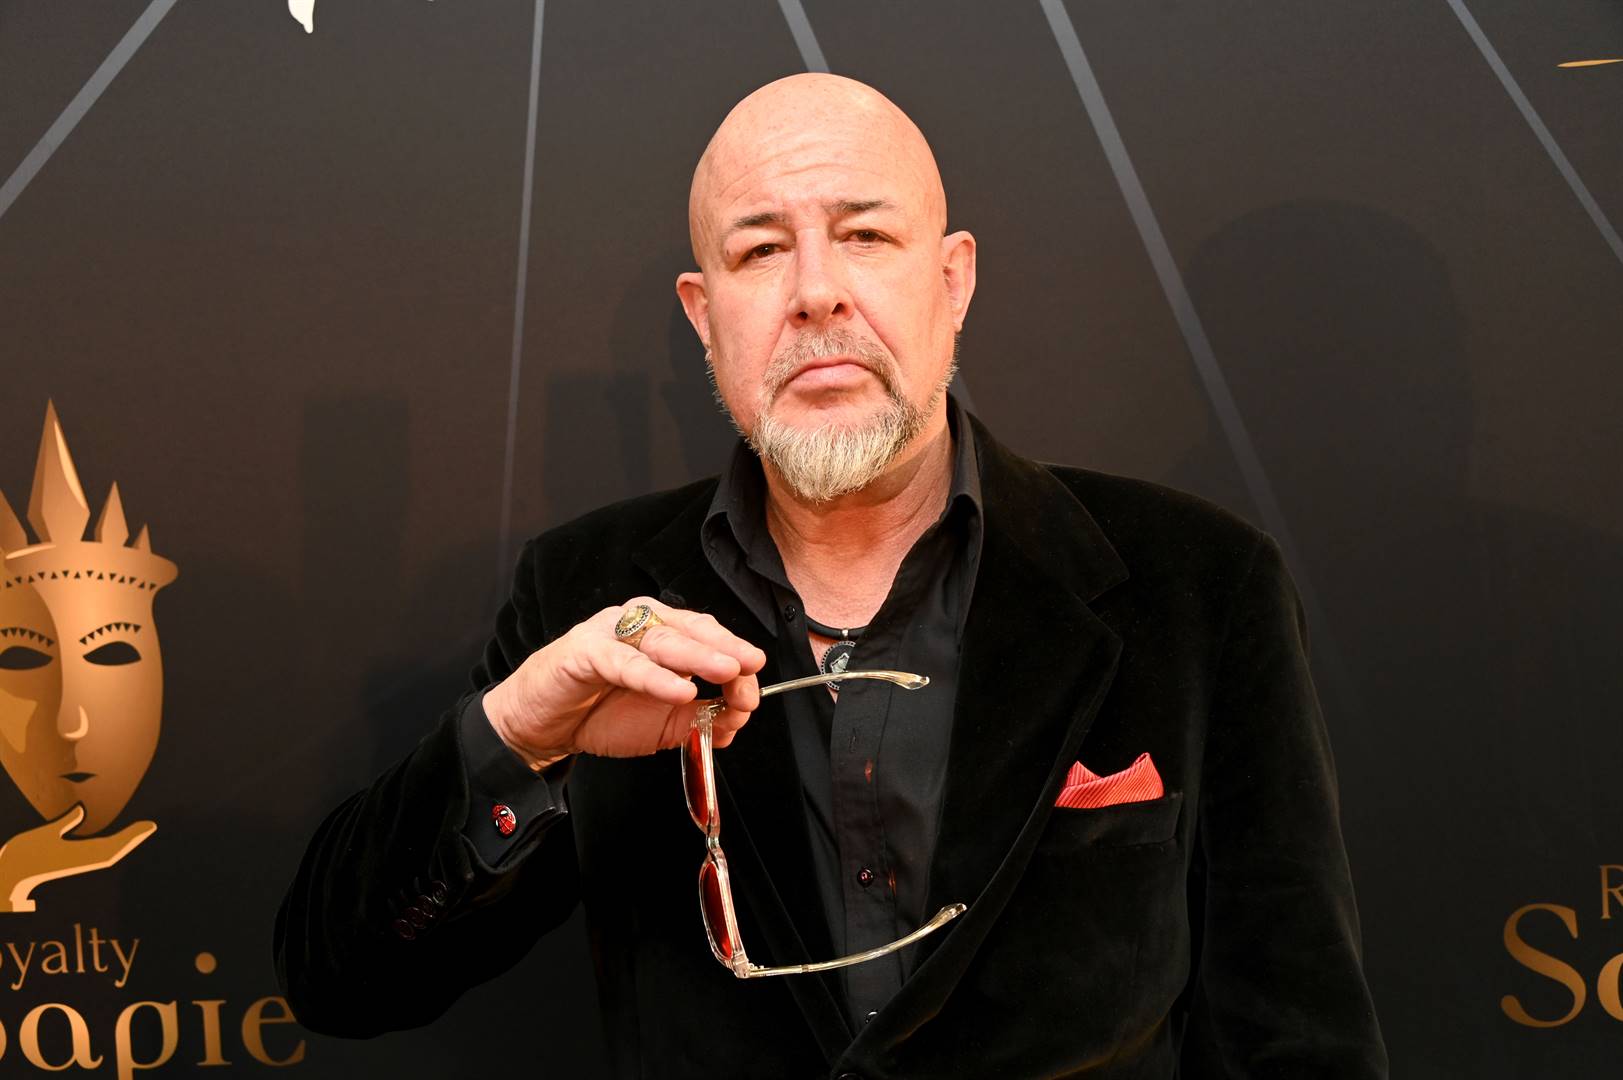 Jamie Bartlett during Royalty Soapie Awards at Raddison Hotel and Convention Centre on September 18 2021 in Johannesburg. Photo: Oupa Bopape/Gallo Images